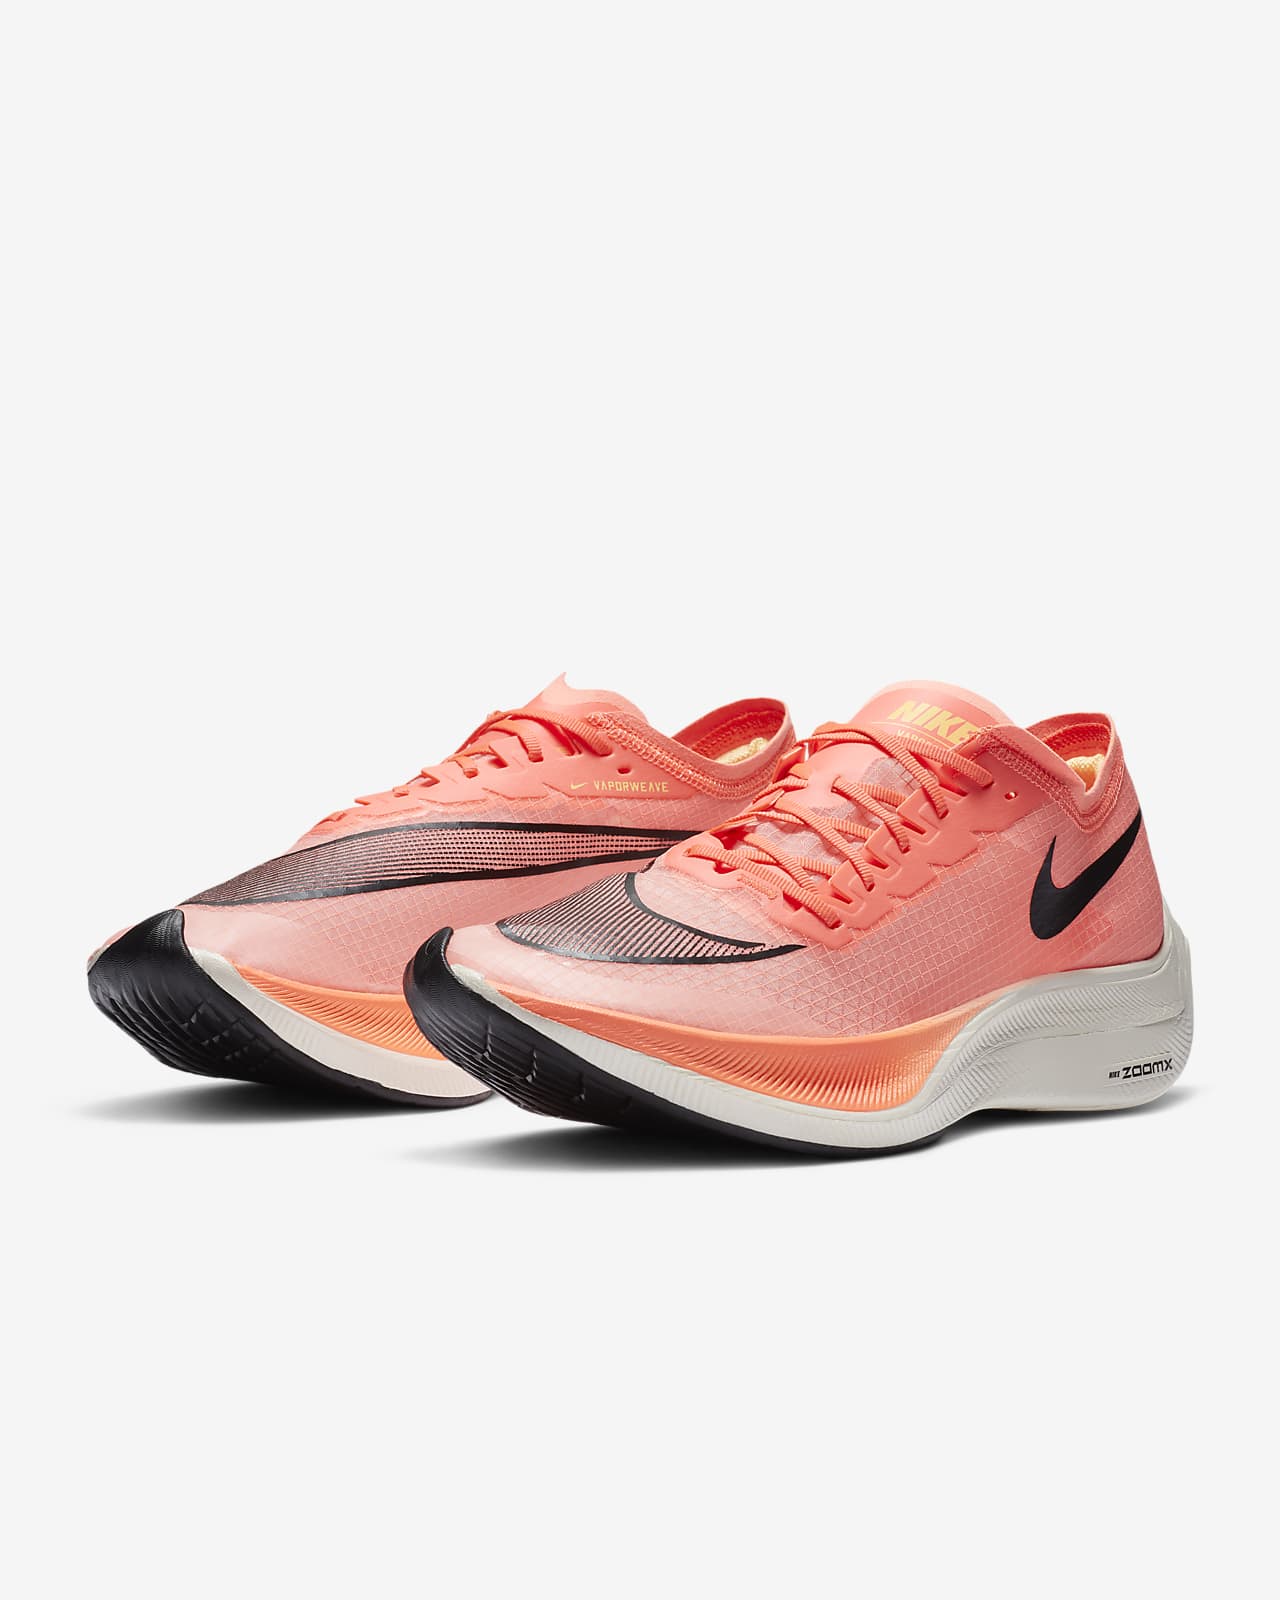 nike vaporfly next review